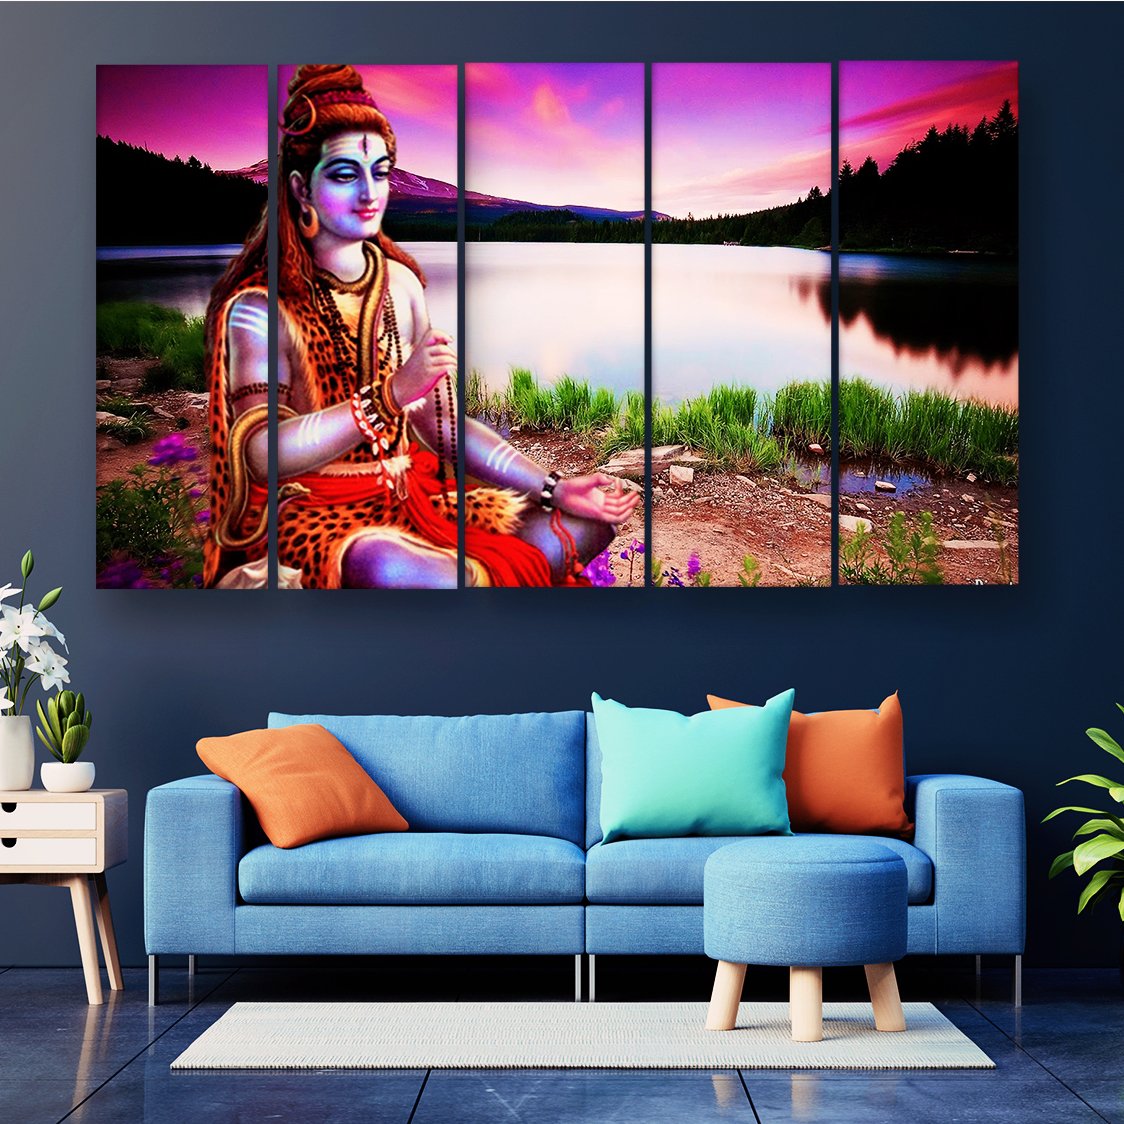 Casperme Shiva Mahadev Wall Painting For Living Room for Bedroom, Hotels & Office Decoration (48×30 inhes)